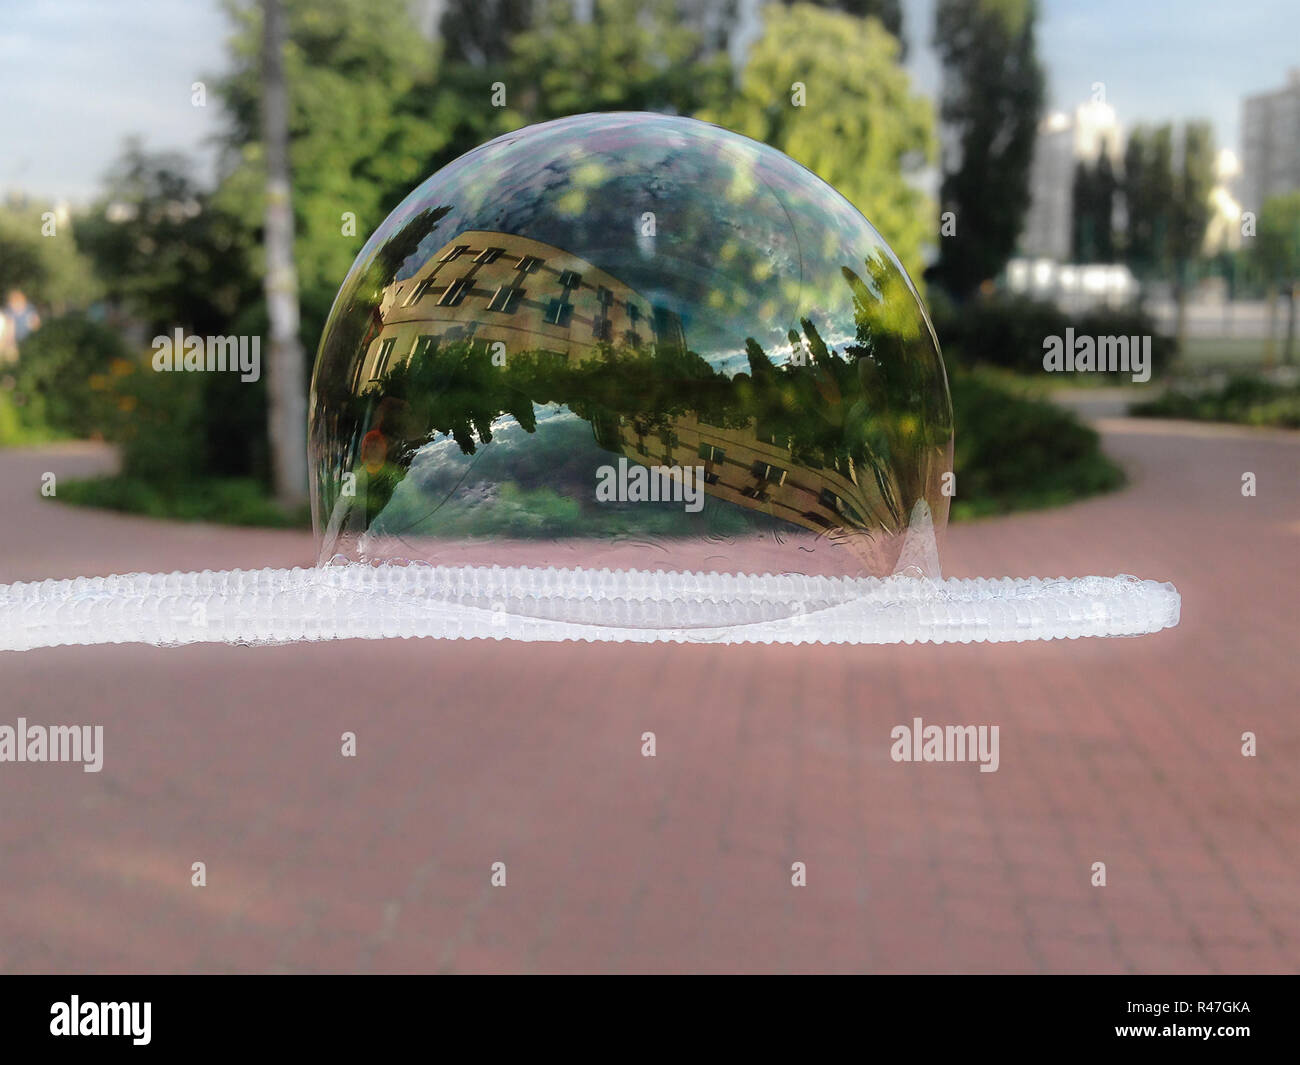 Big soap bubble on a bubble blower. Building and trees reflecting in a huge  bubble in a city park Stock Photo - Alamy